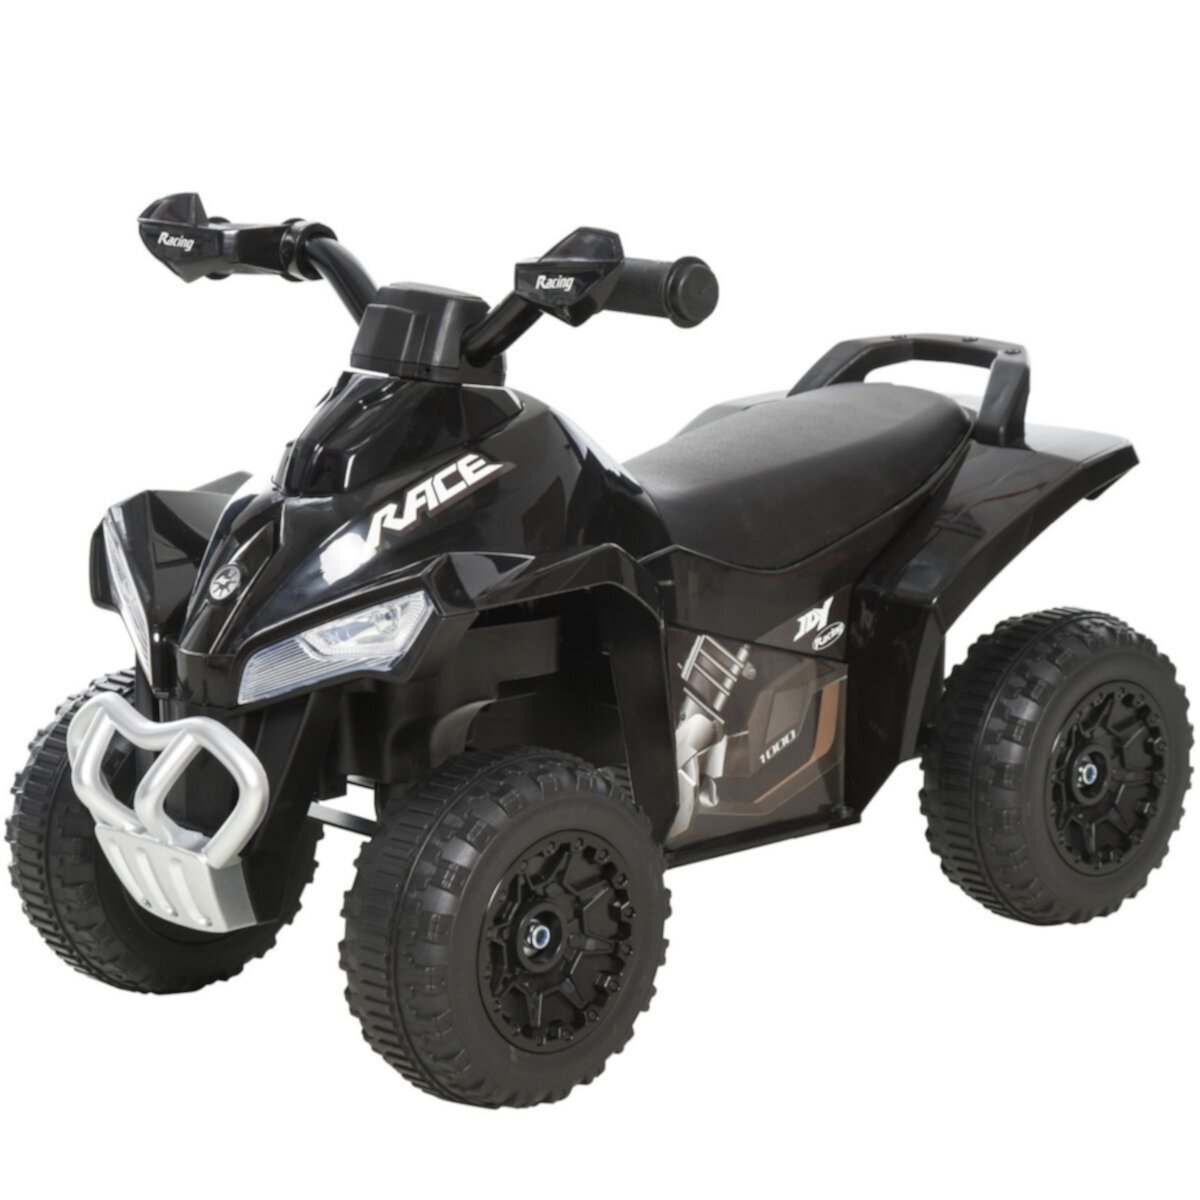 Aosom NO Power Ride on Car for Kids 4 Wheel Foot to Floor Sliding Walking Push Along ATV Toy for 18 36 Months Pink Aosom